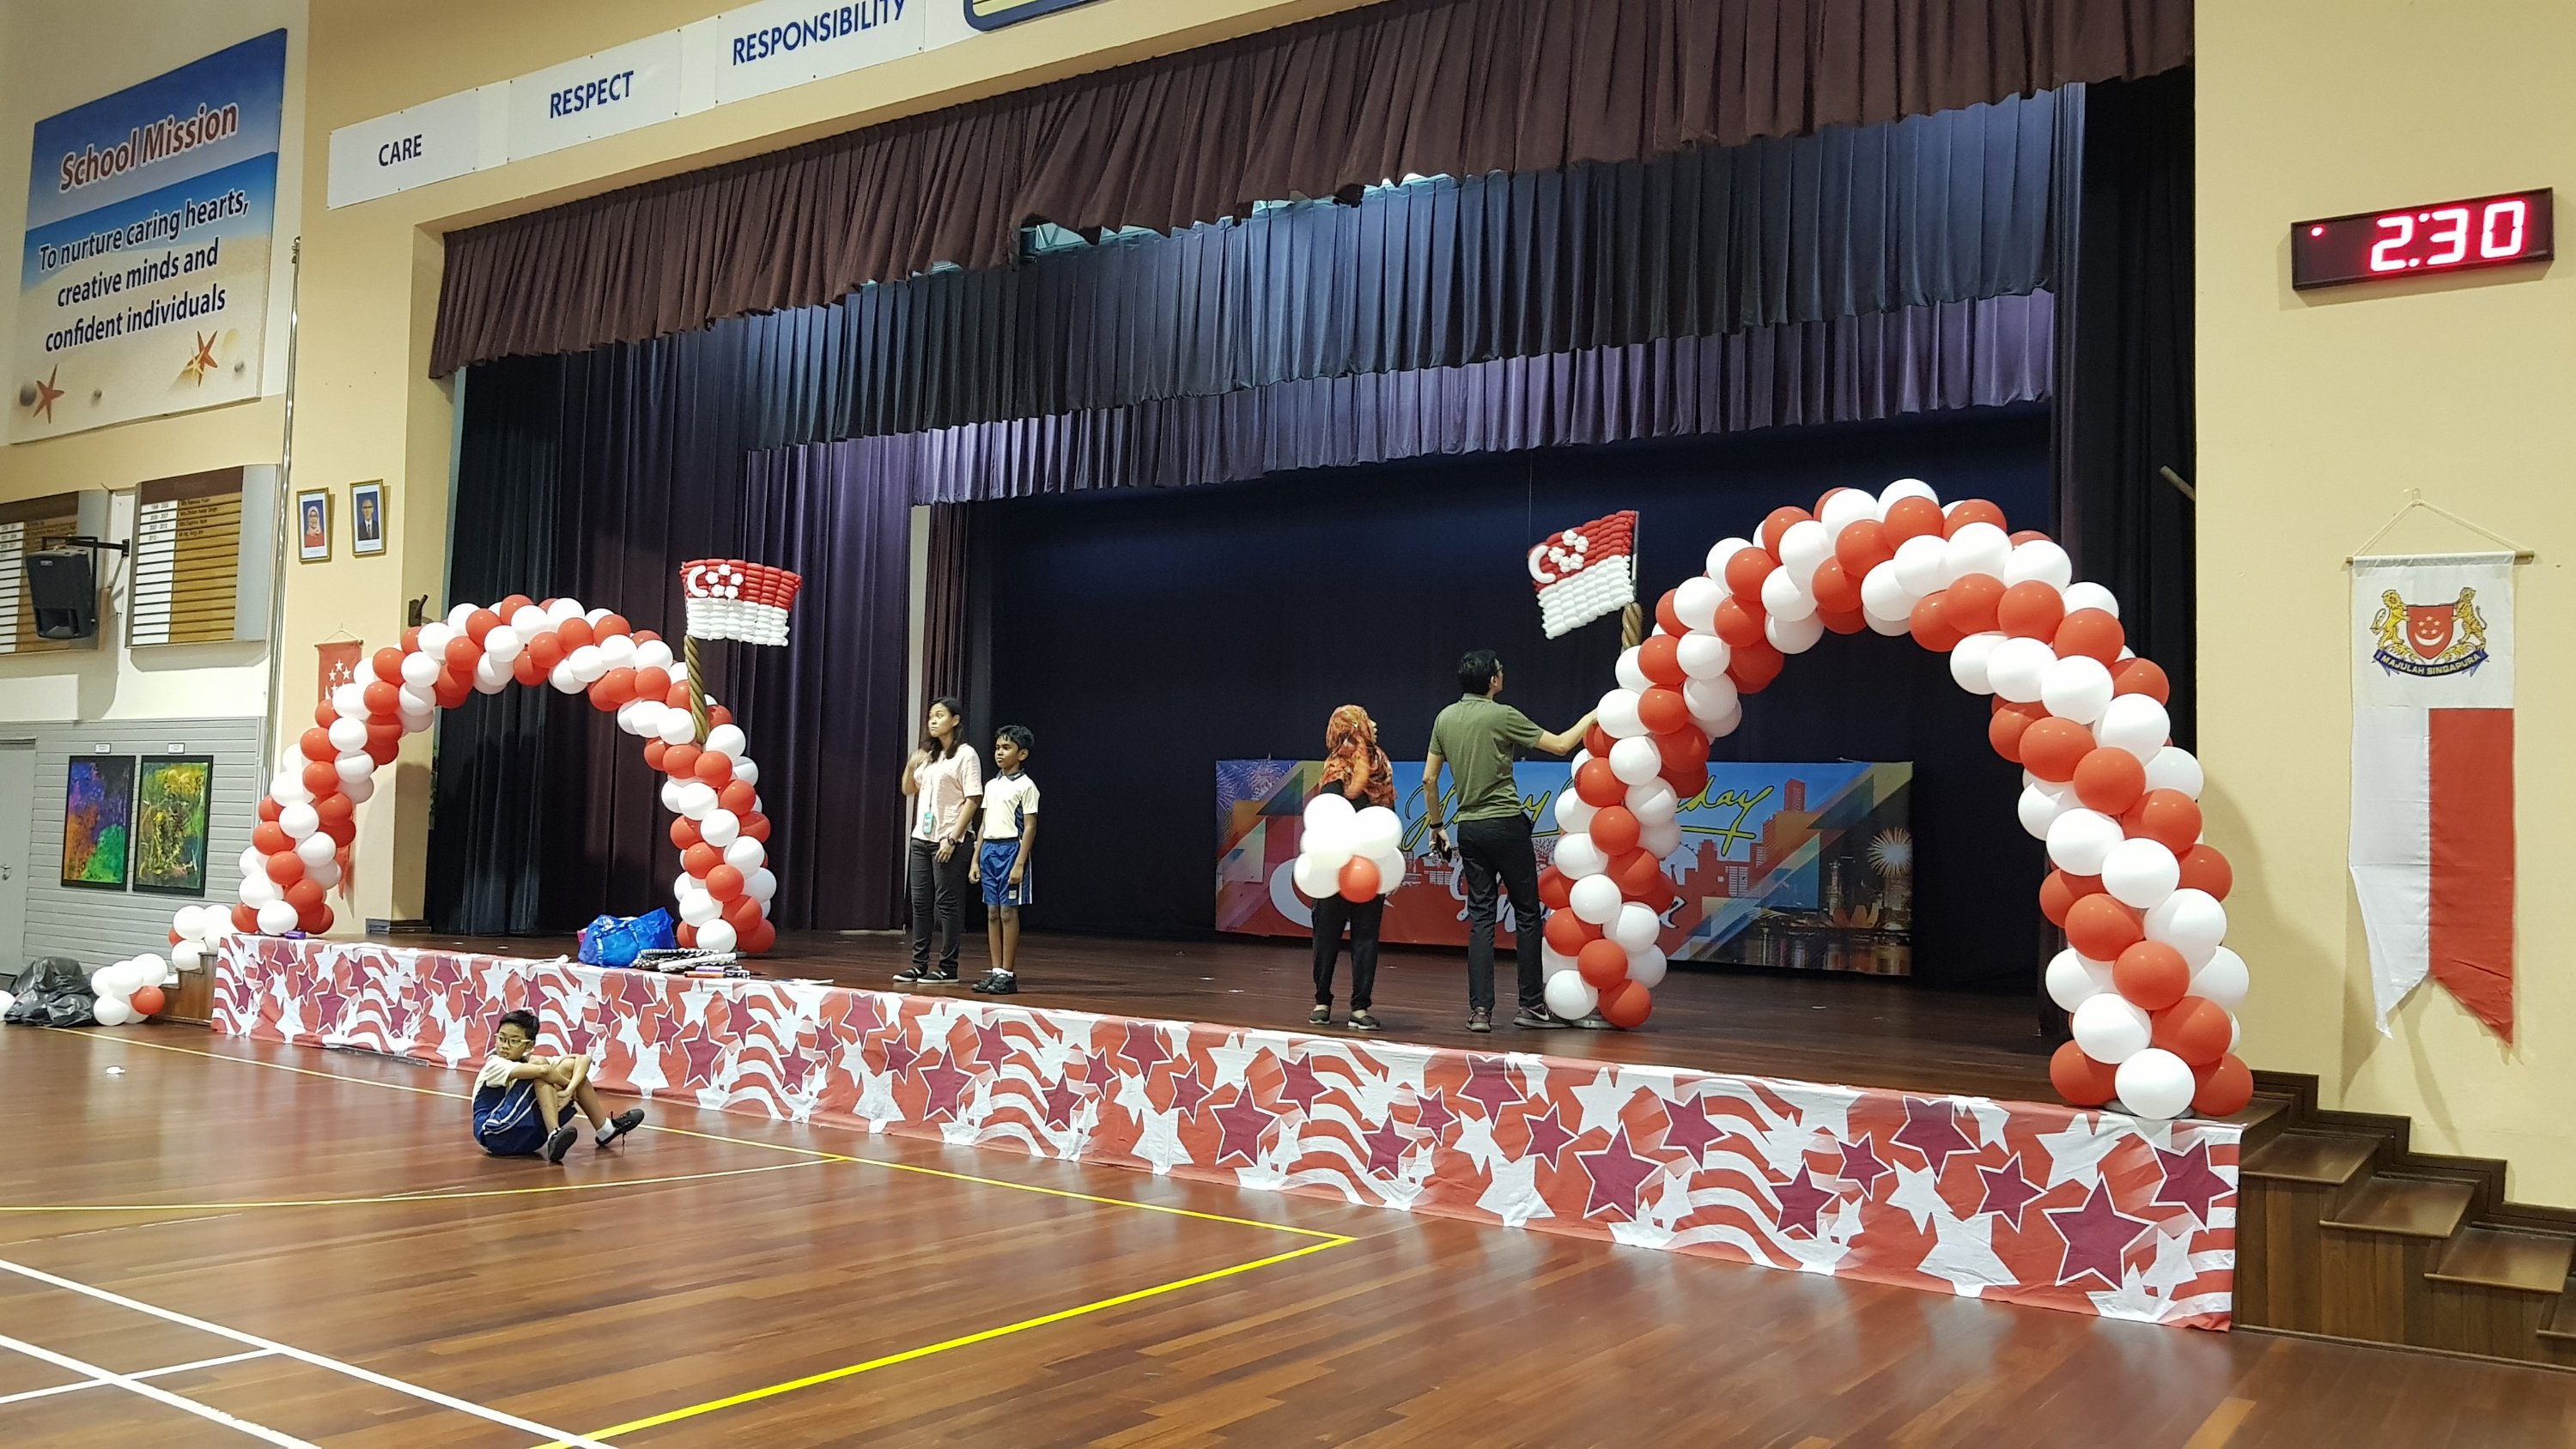 , Singapore national day balloon decorations!, Singapore Balloon Decoration Services - Balloon Workshop and Balloon Sculpting